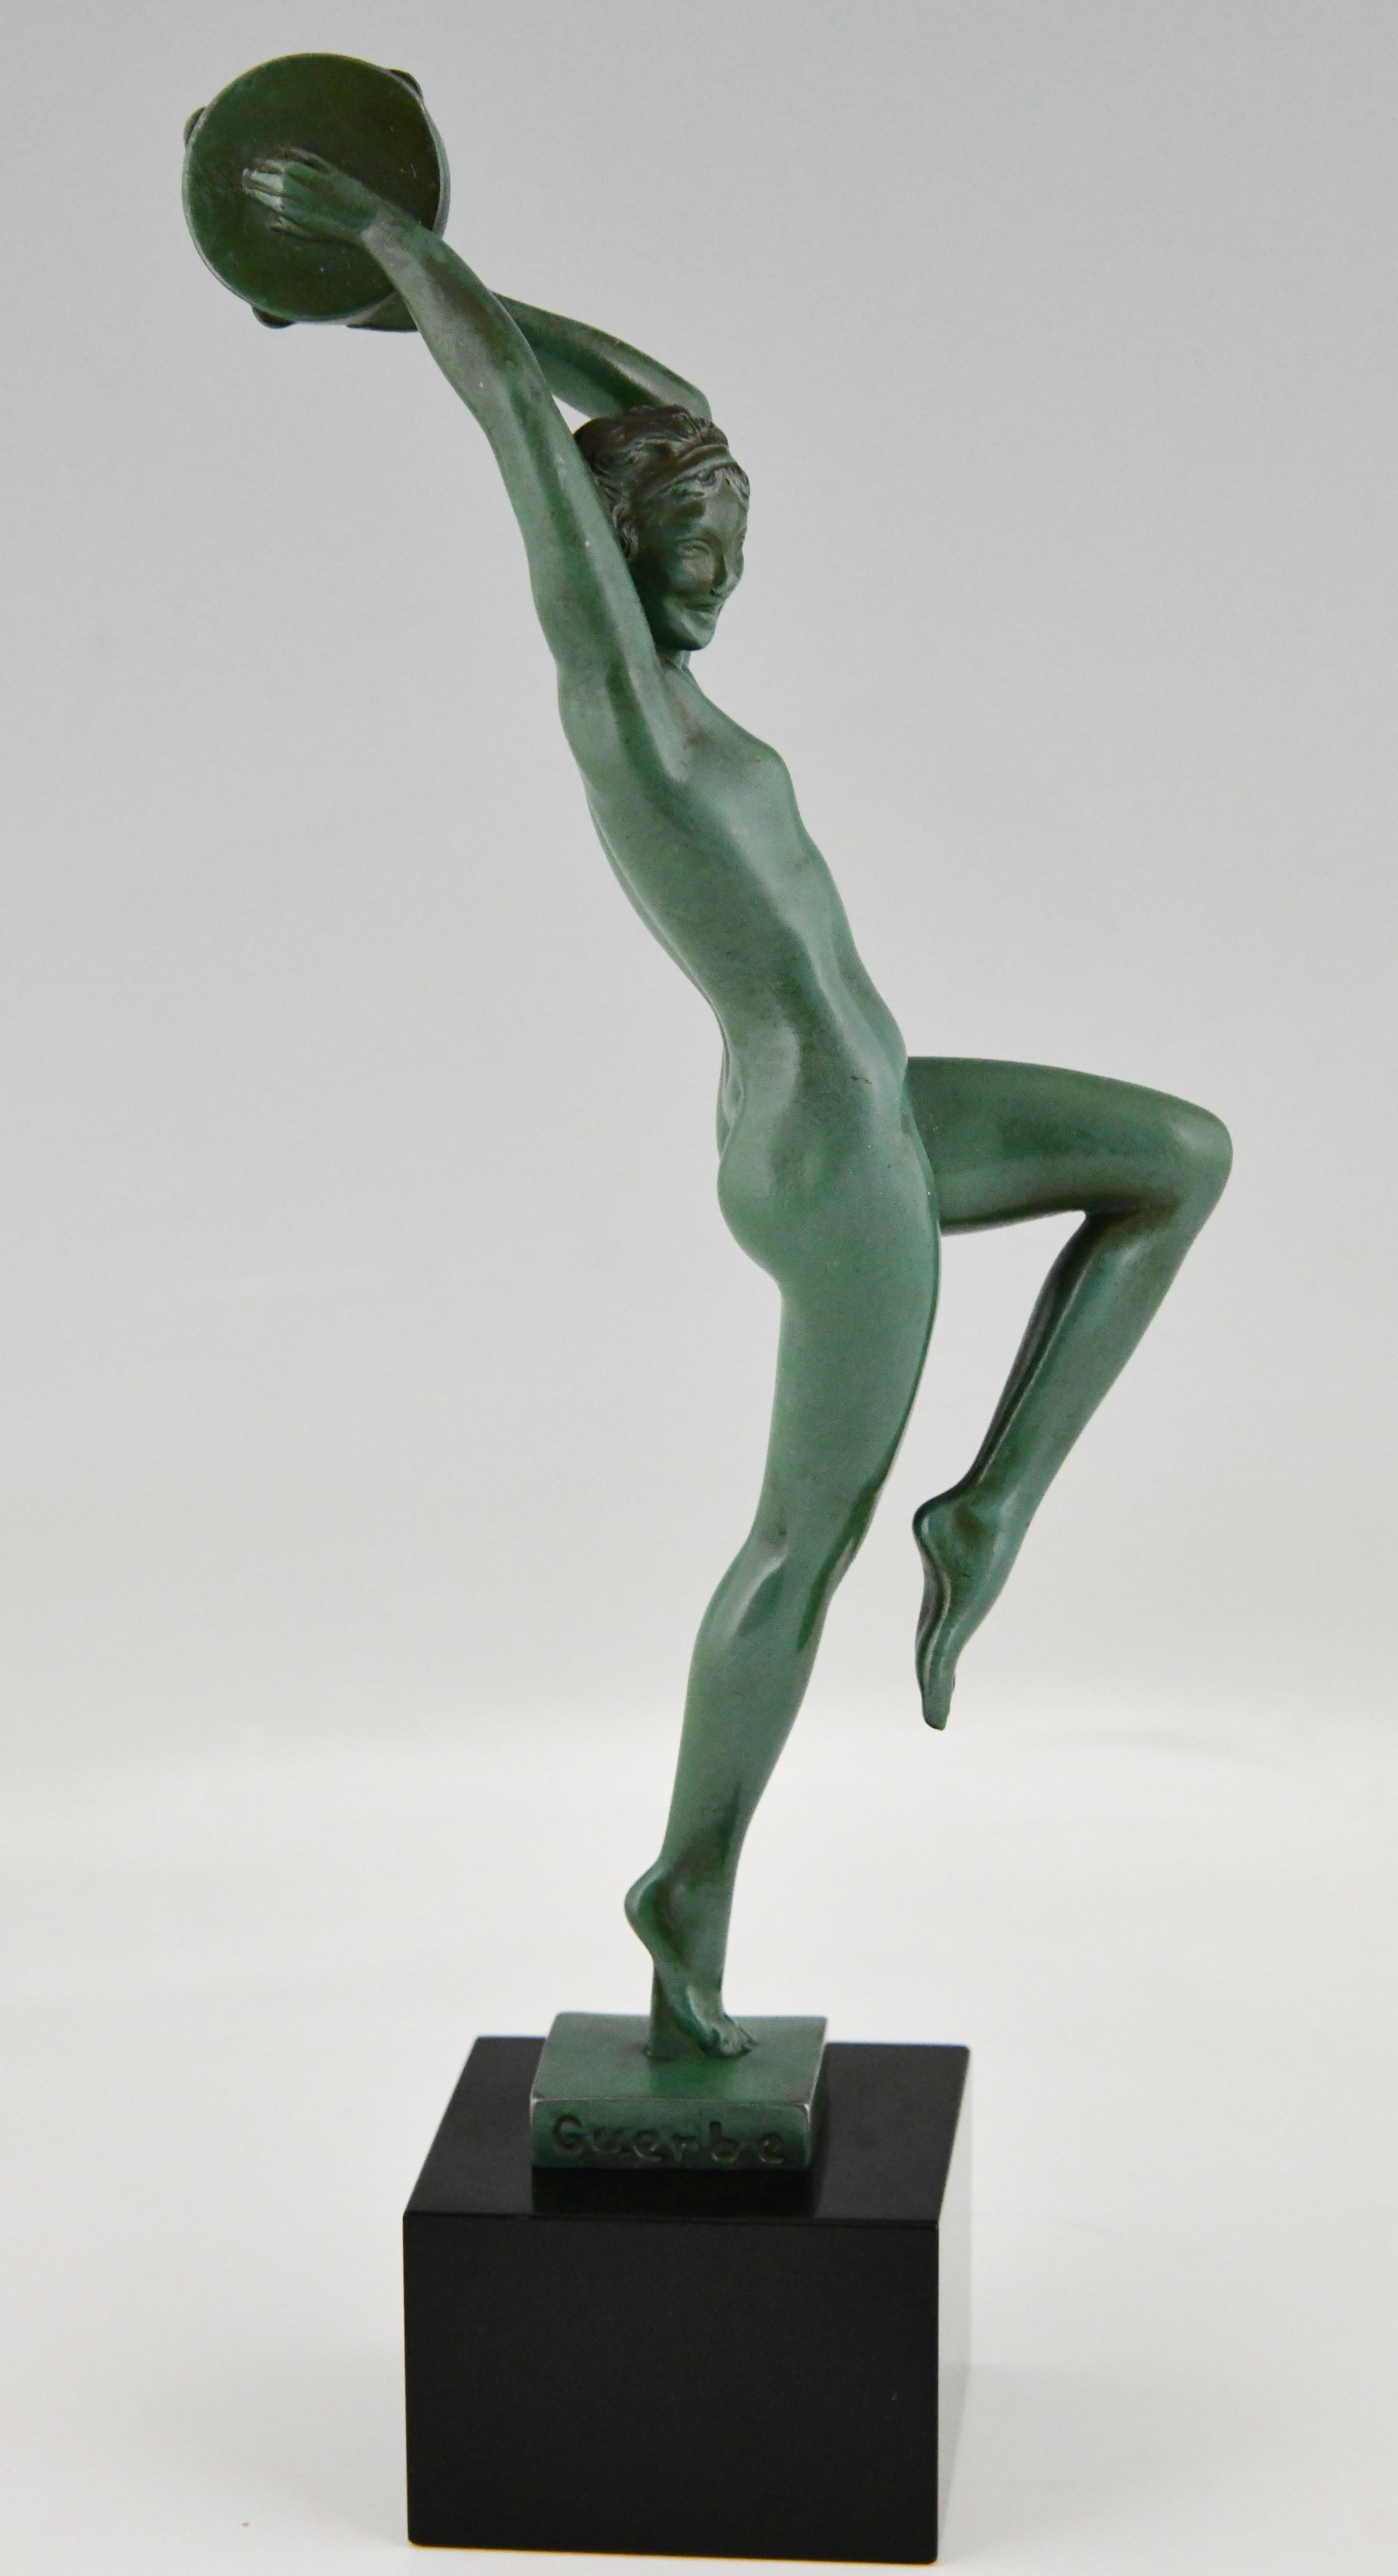 Art Deco sculpture nude with tambourine by Raymonde Guerbe.
The sculpture is in patinated Art metal and stands on a Belgian black marble base.
France 1930. 

Bronzes, sculptors and founders by H. Berman, Abage.
Art deco and other figures by